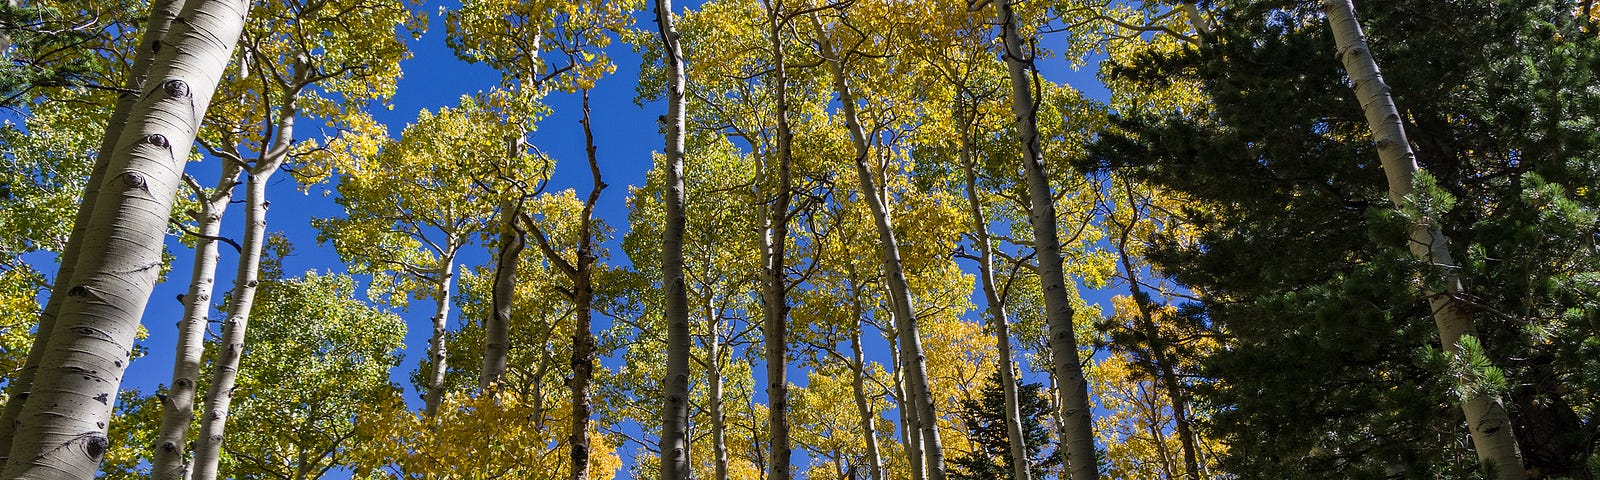 Fall color September 25, 2016 in the upper end of Bear Jaw Canyon, Bear Jaw Trail Coconino National Forest 